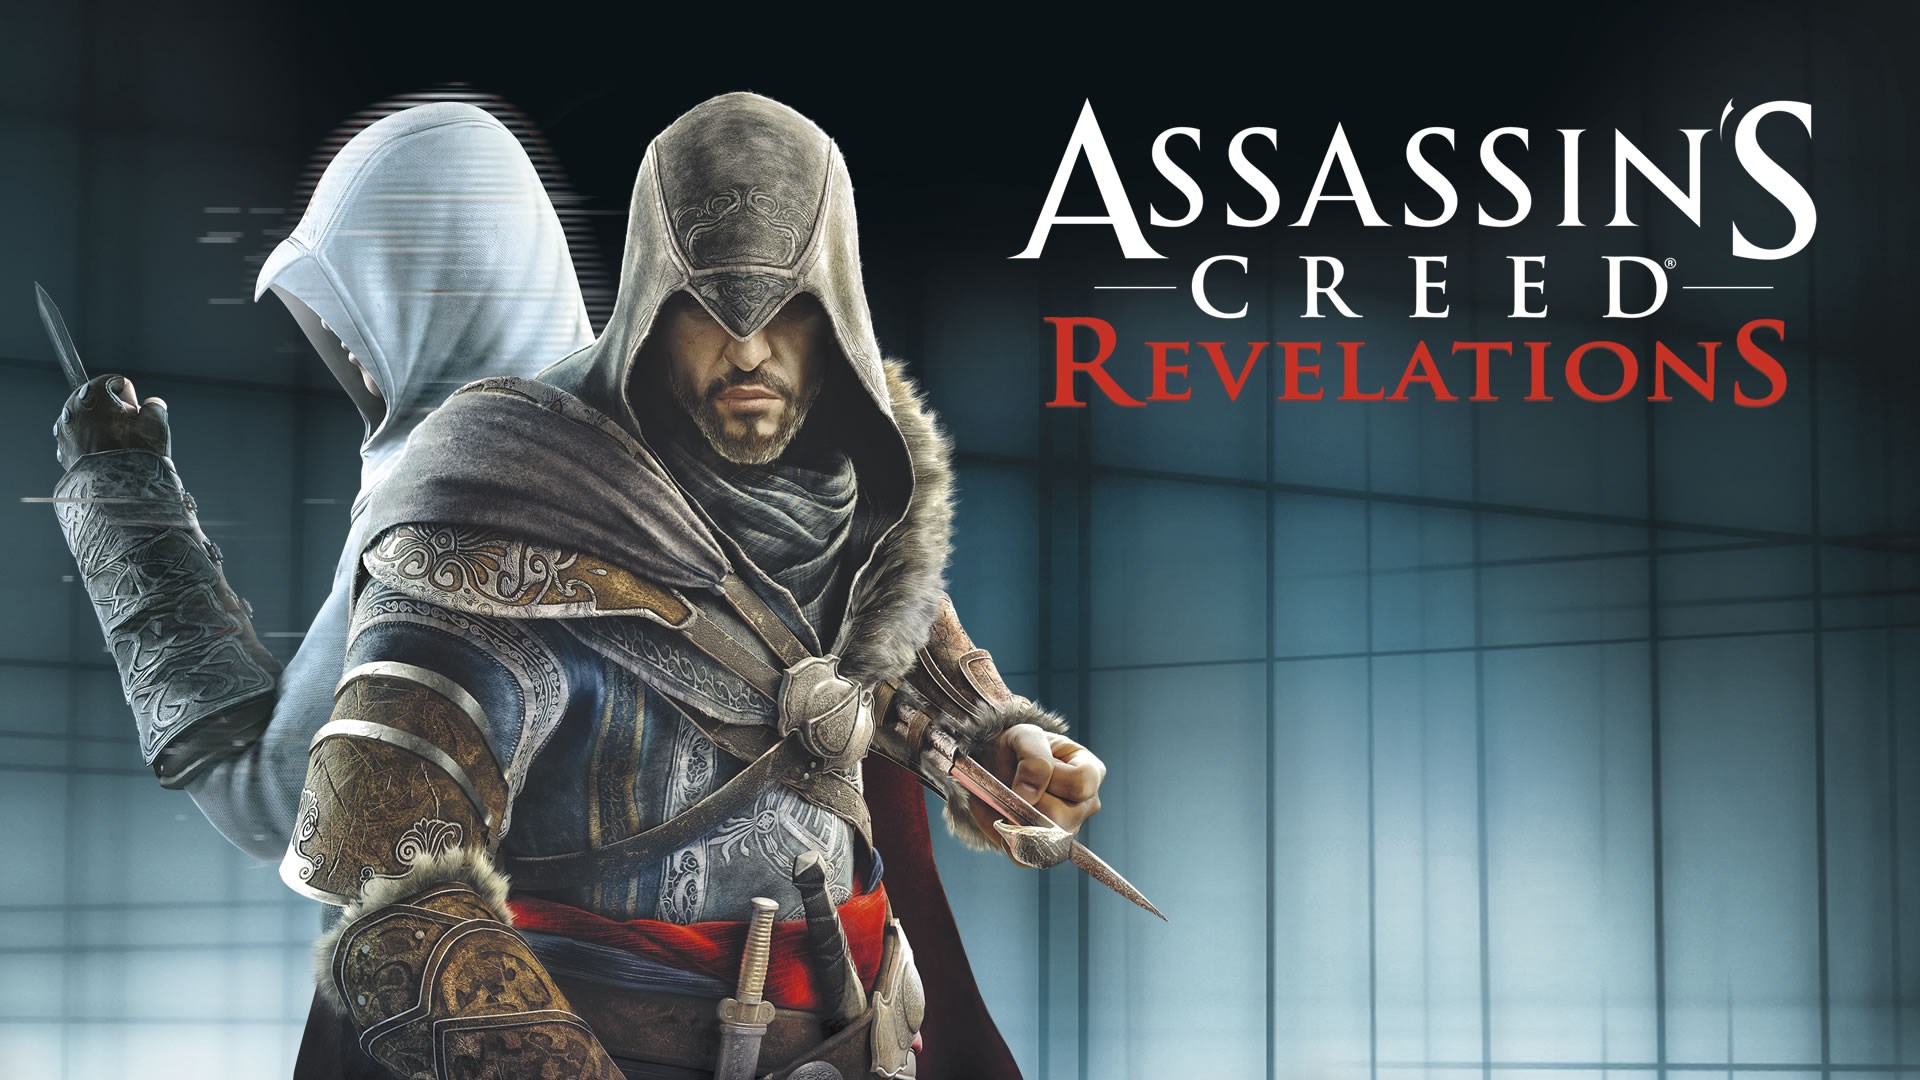 Assassin's Creed Revelations System Requirements